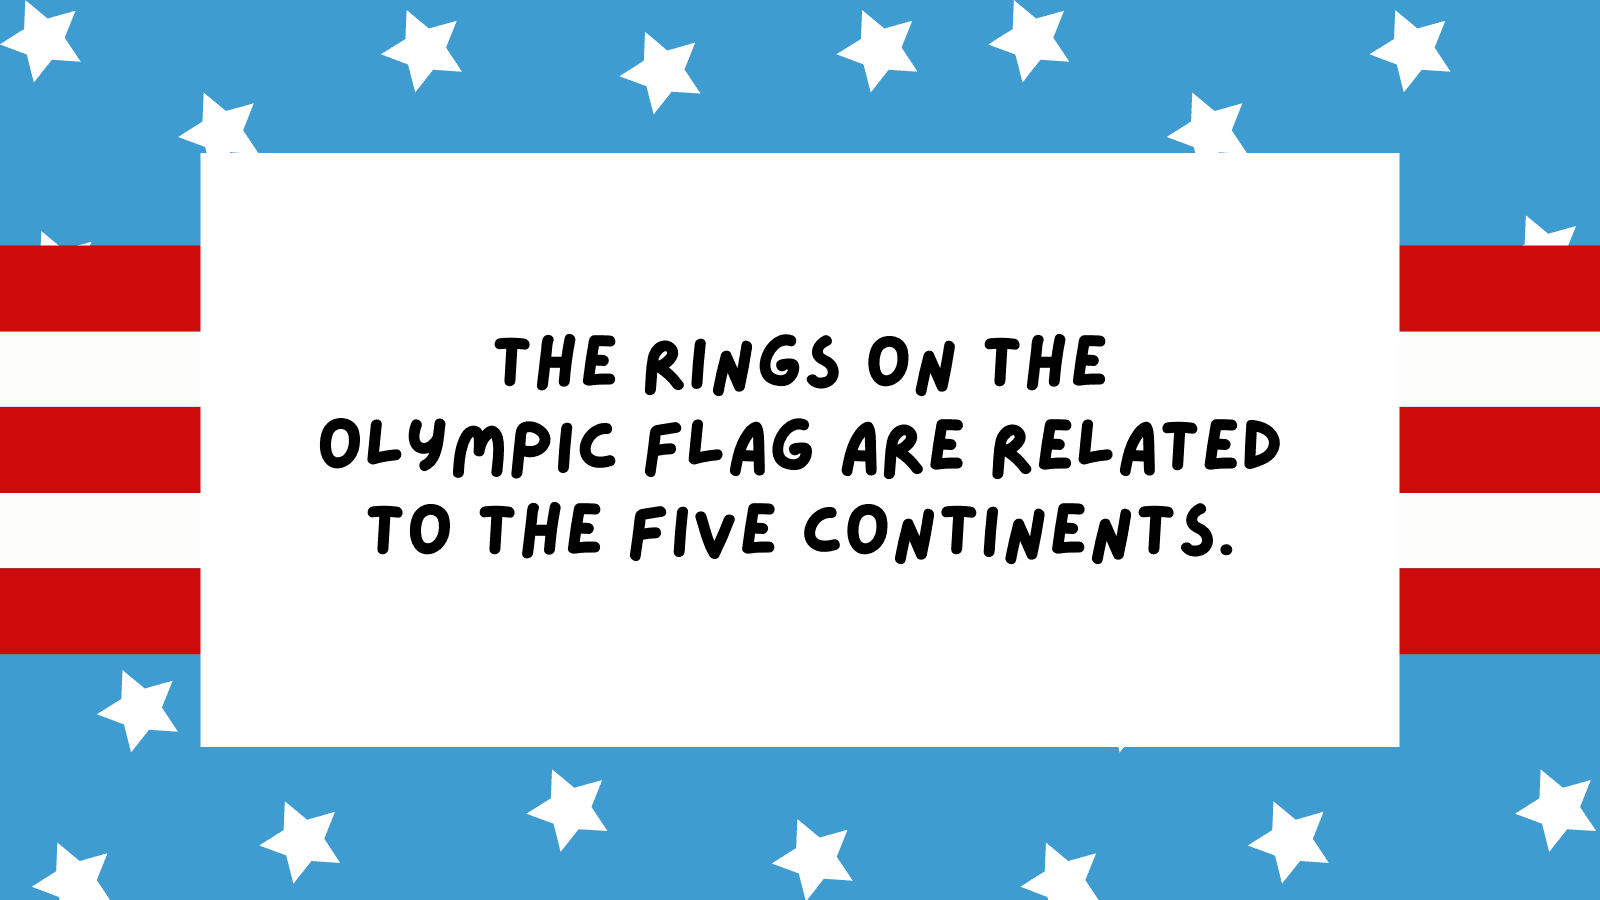 The rings on the Olympic flag are related to the five continents.